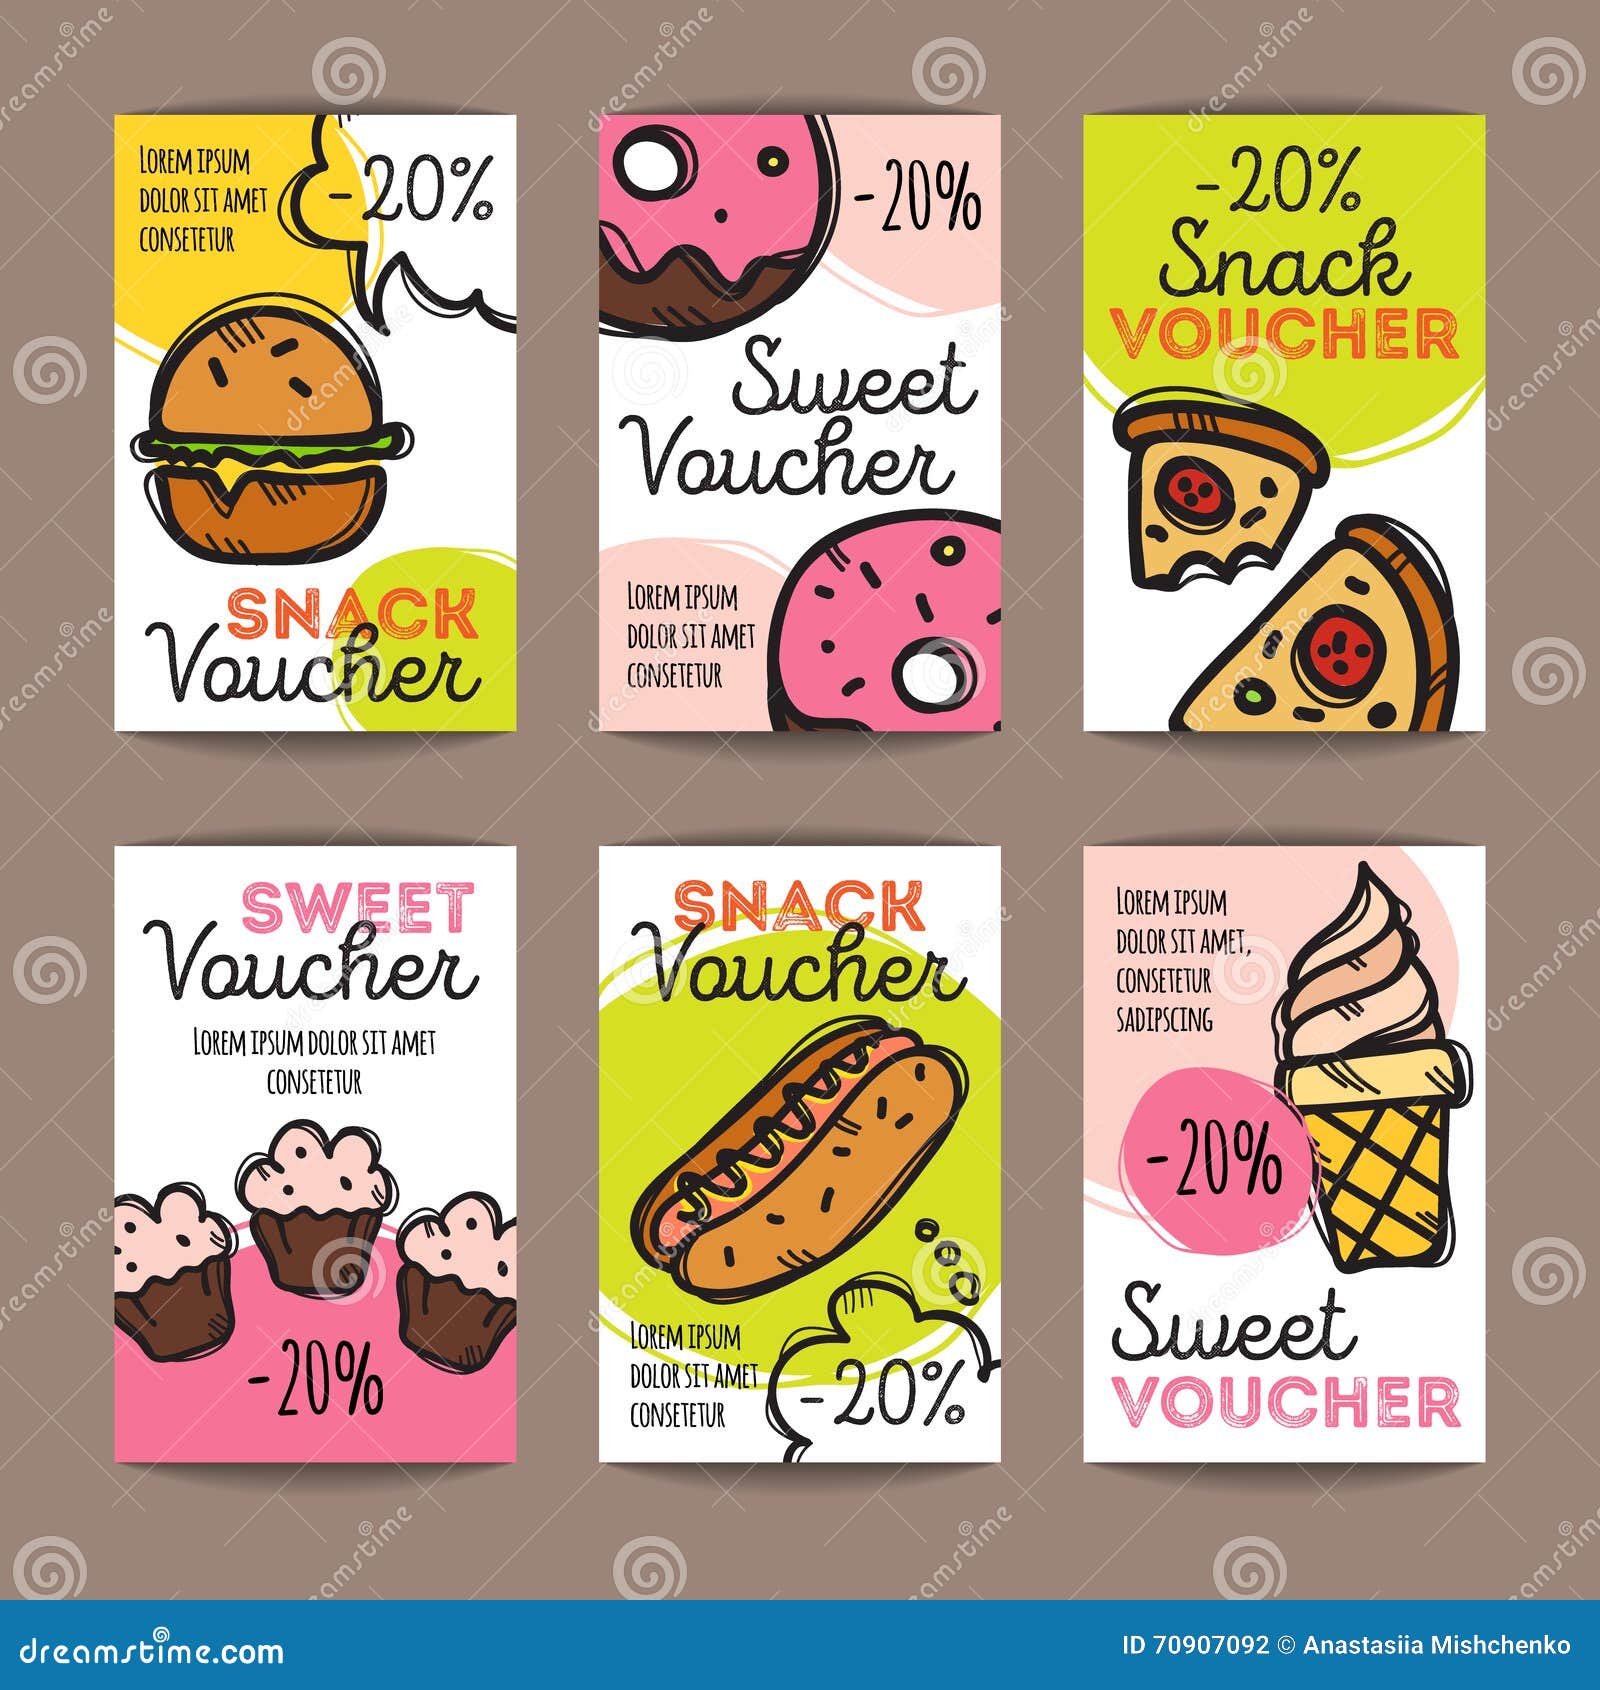 Vector Set Of Discount Coupons For Fast Food And Desserts Colorful